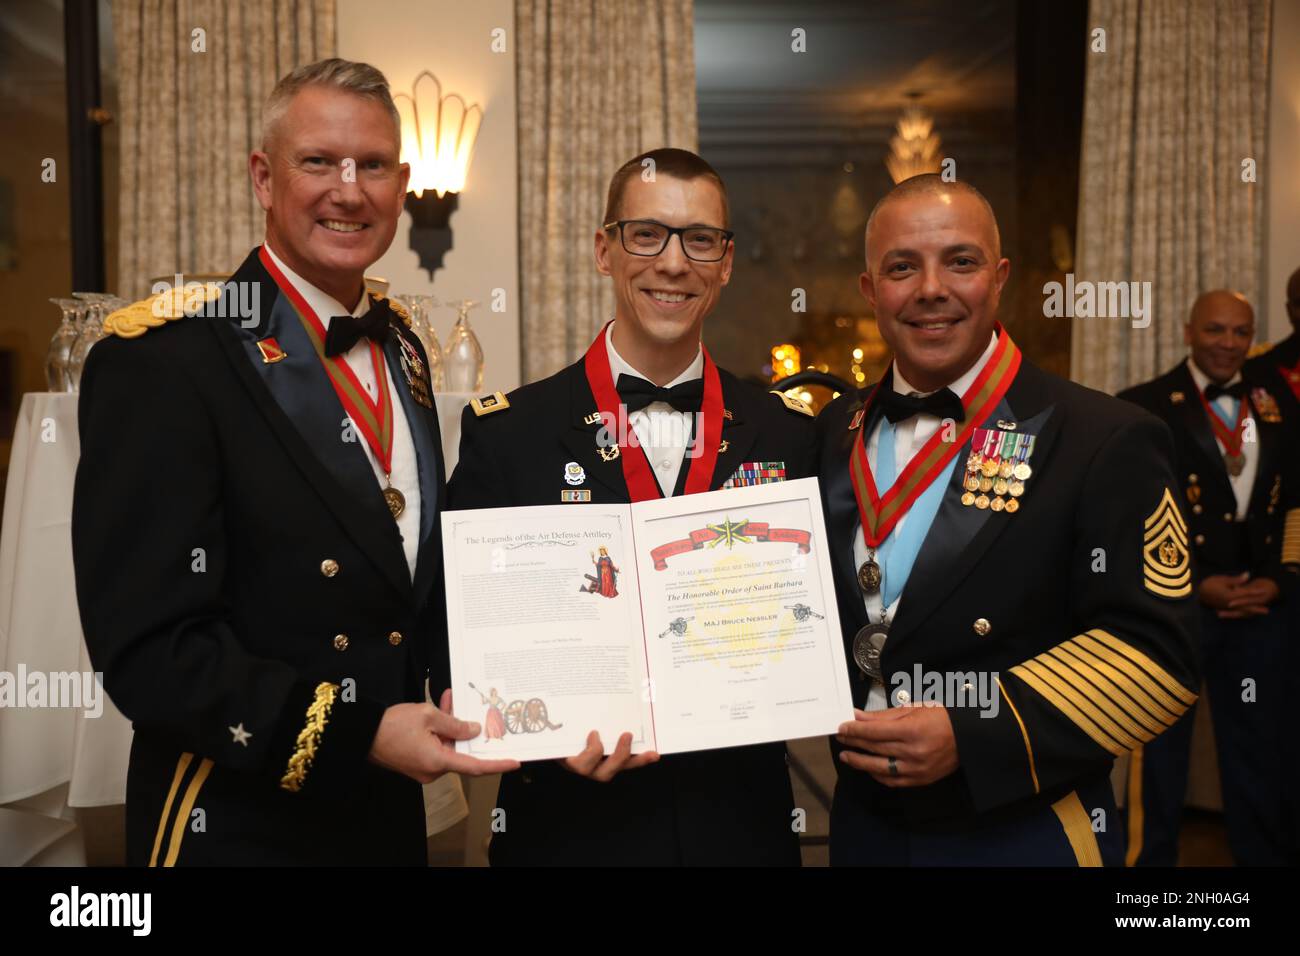 Maj. Bruce Nessler, Staff Judge Advocate, 32d AAMDC, was inducted into the Honorable Order of Saint Barbara during the Saint Barbara's Social, December 3rd at the Plaza Hotel in El Paso, Texas Stock Photo